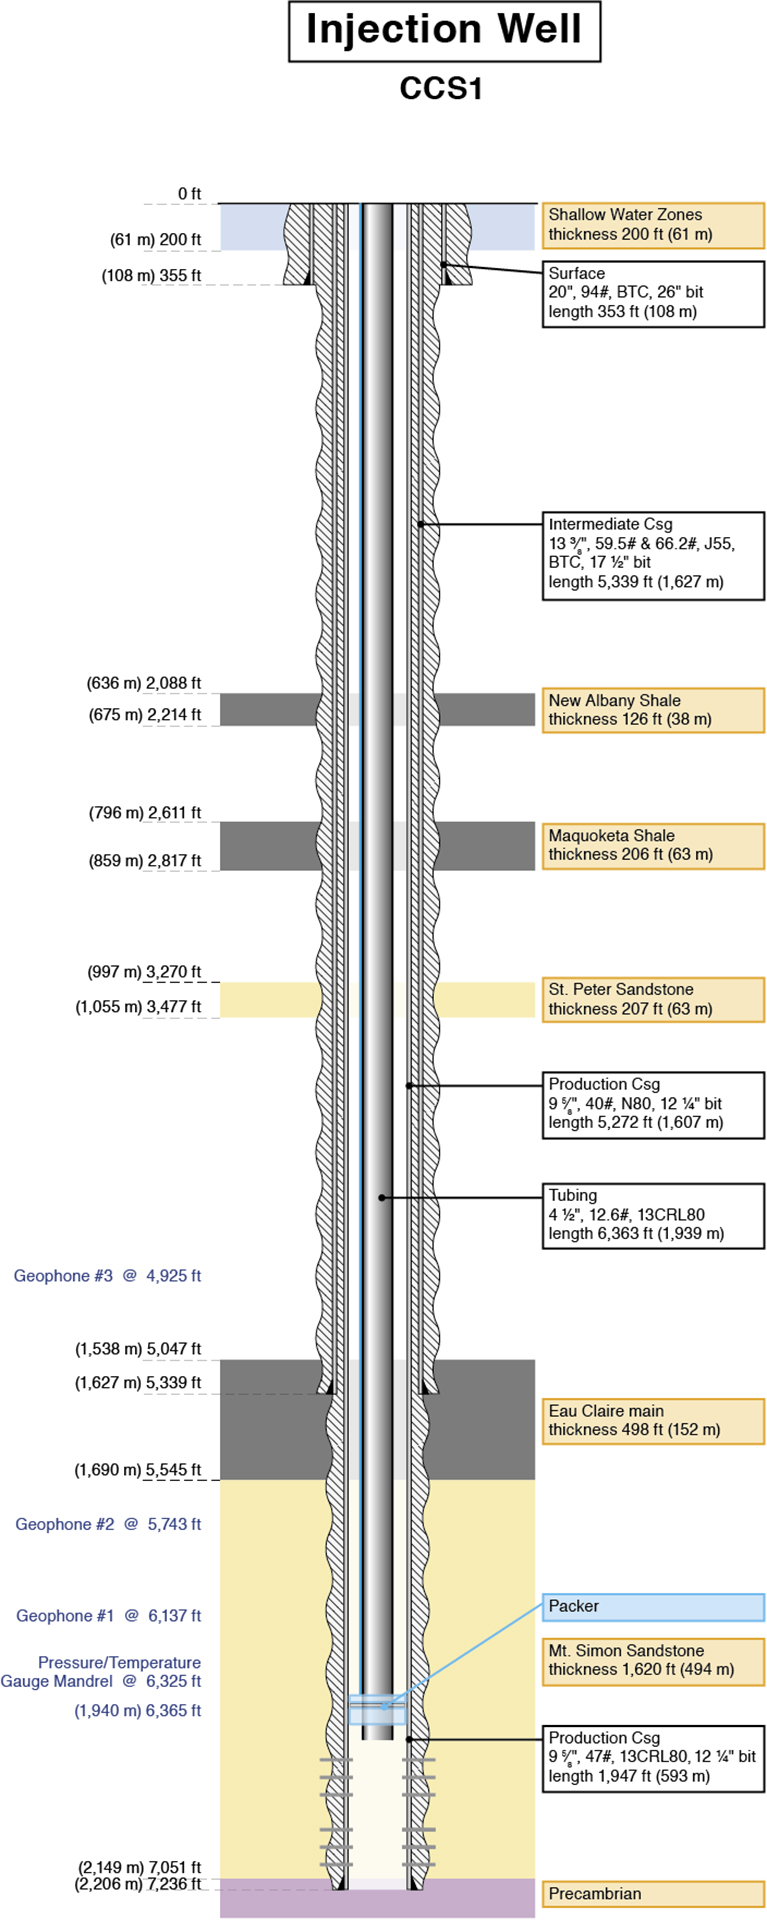 Generalized stratigraphic column at the IBDP site.